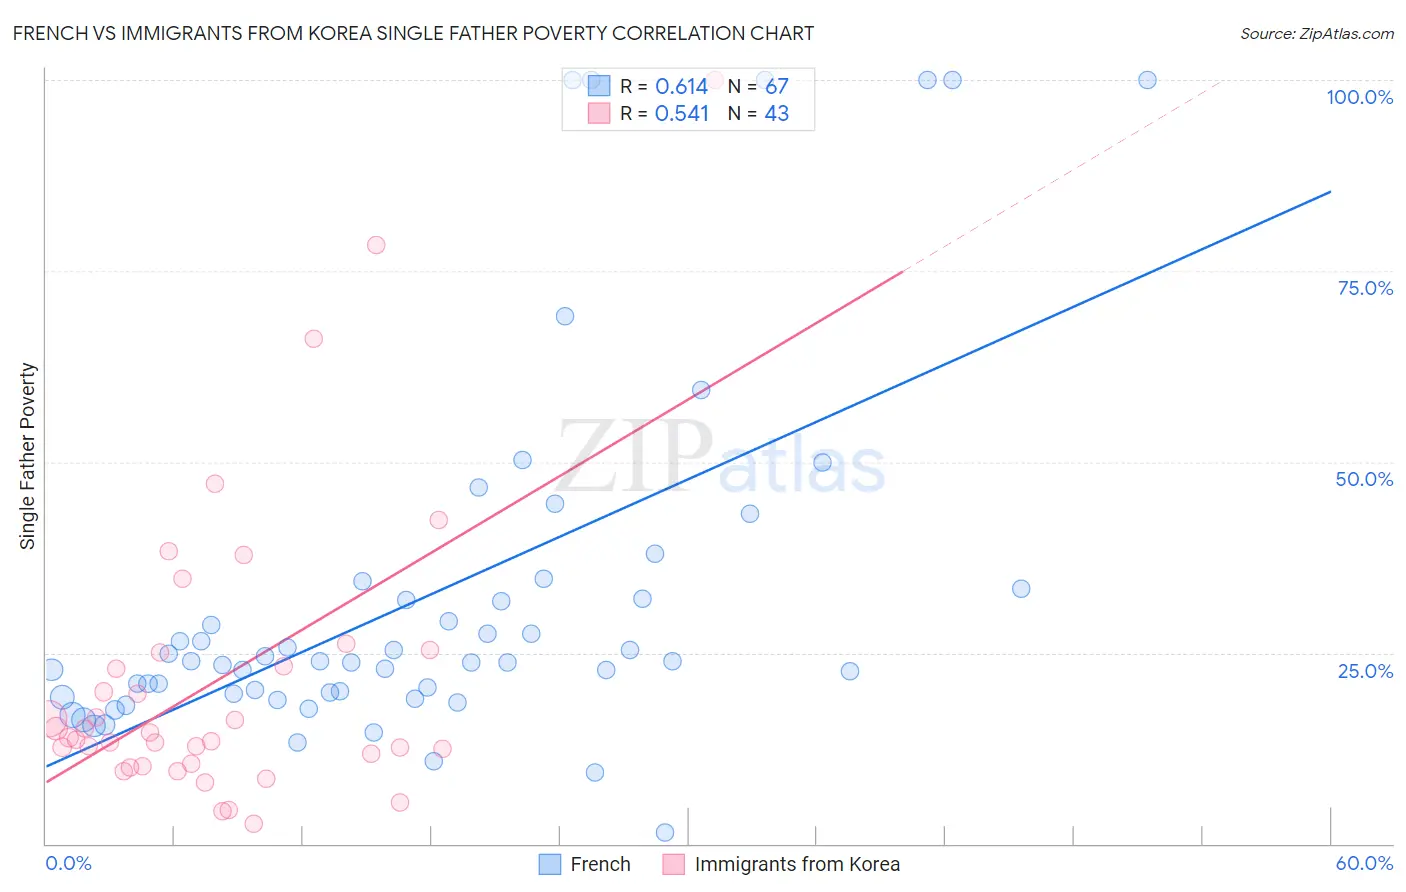 French vs Immigrants from Korea Single Father Poverty